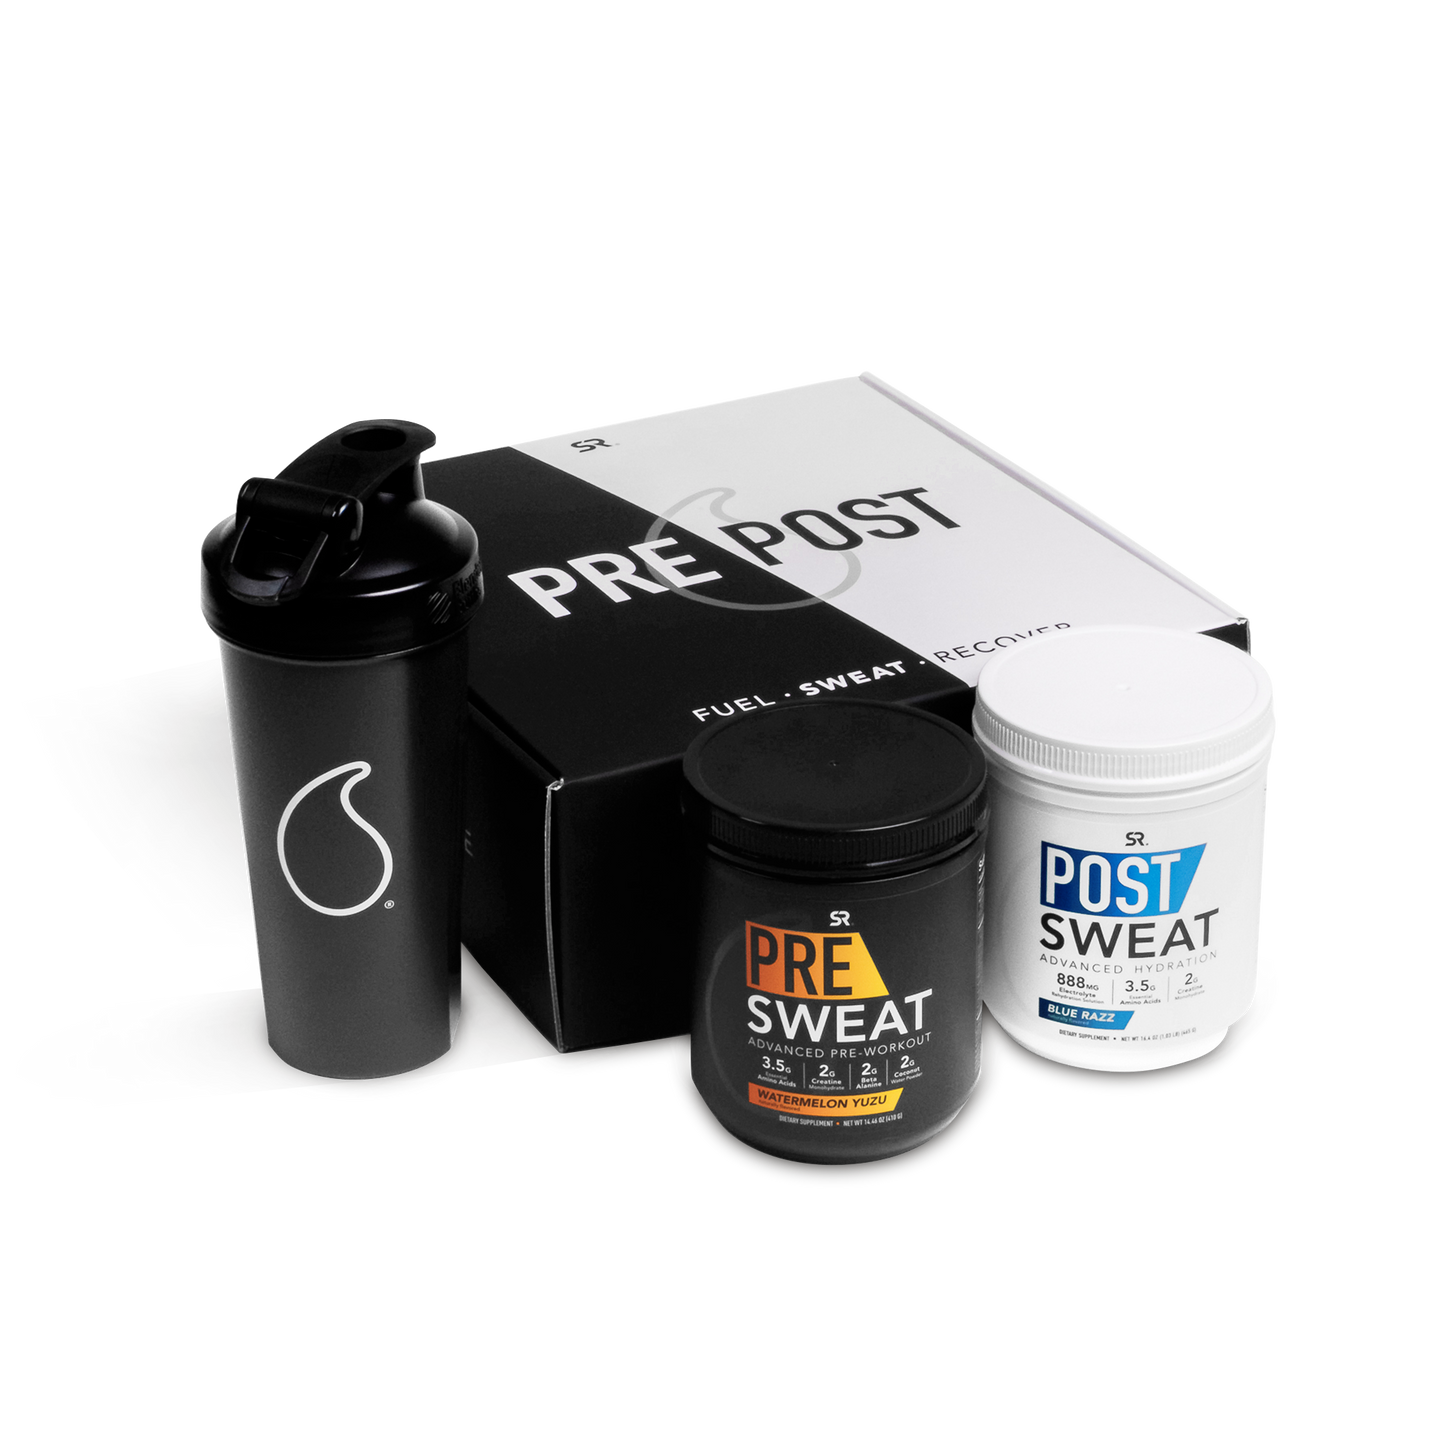 Sports Research® Pre & Post Sweat Bundle, tub of Sports Research® Pre Sweat Watermelon Yuzu flavored pre-workout powder, tub of Sports Research® Post Sweat Blue Razz flavored advanced hydration powder, and a Sweet Sweat® shaker cup all in a special box.